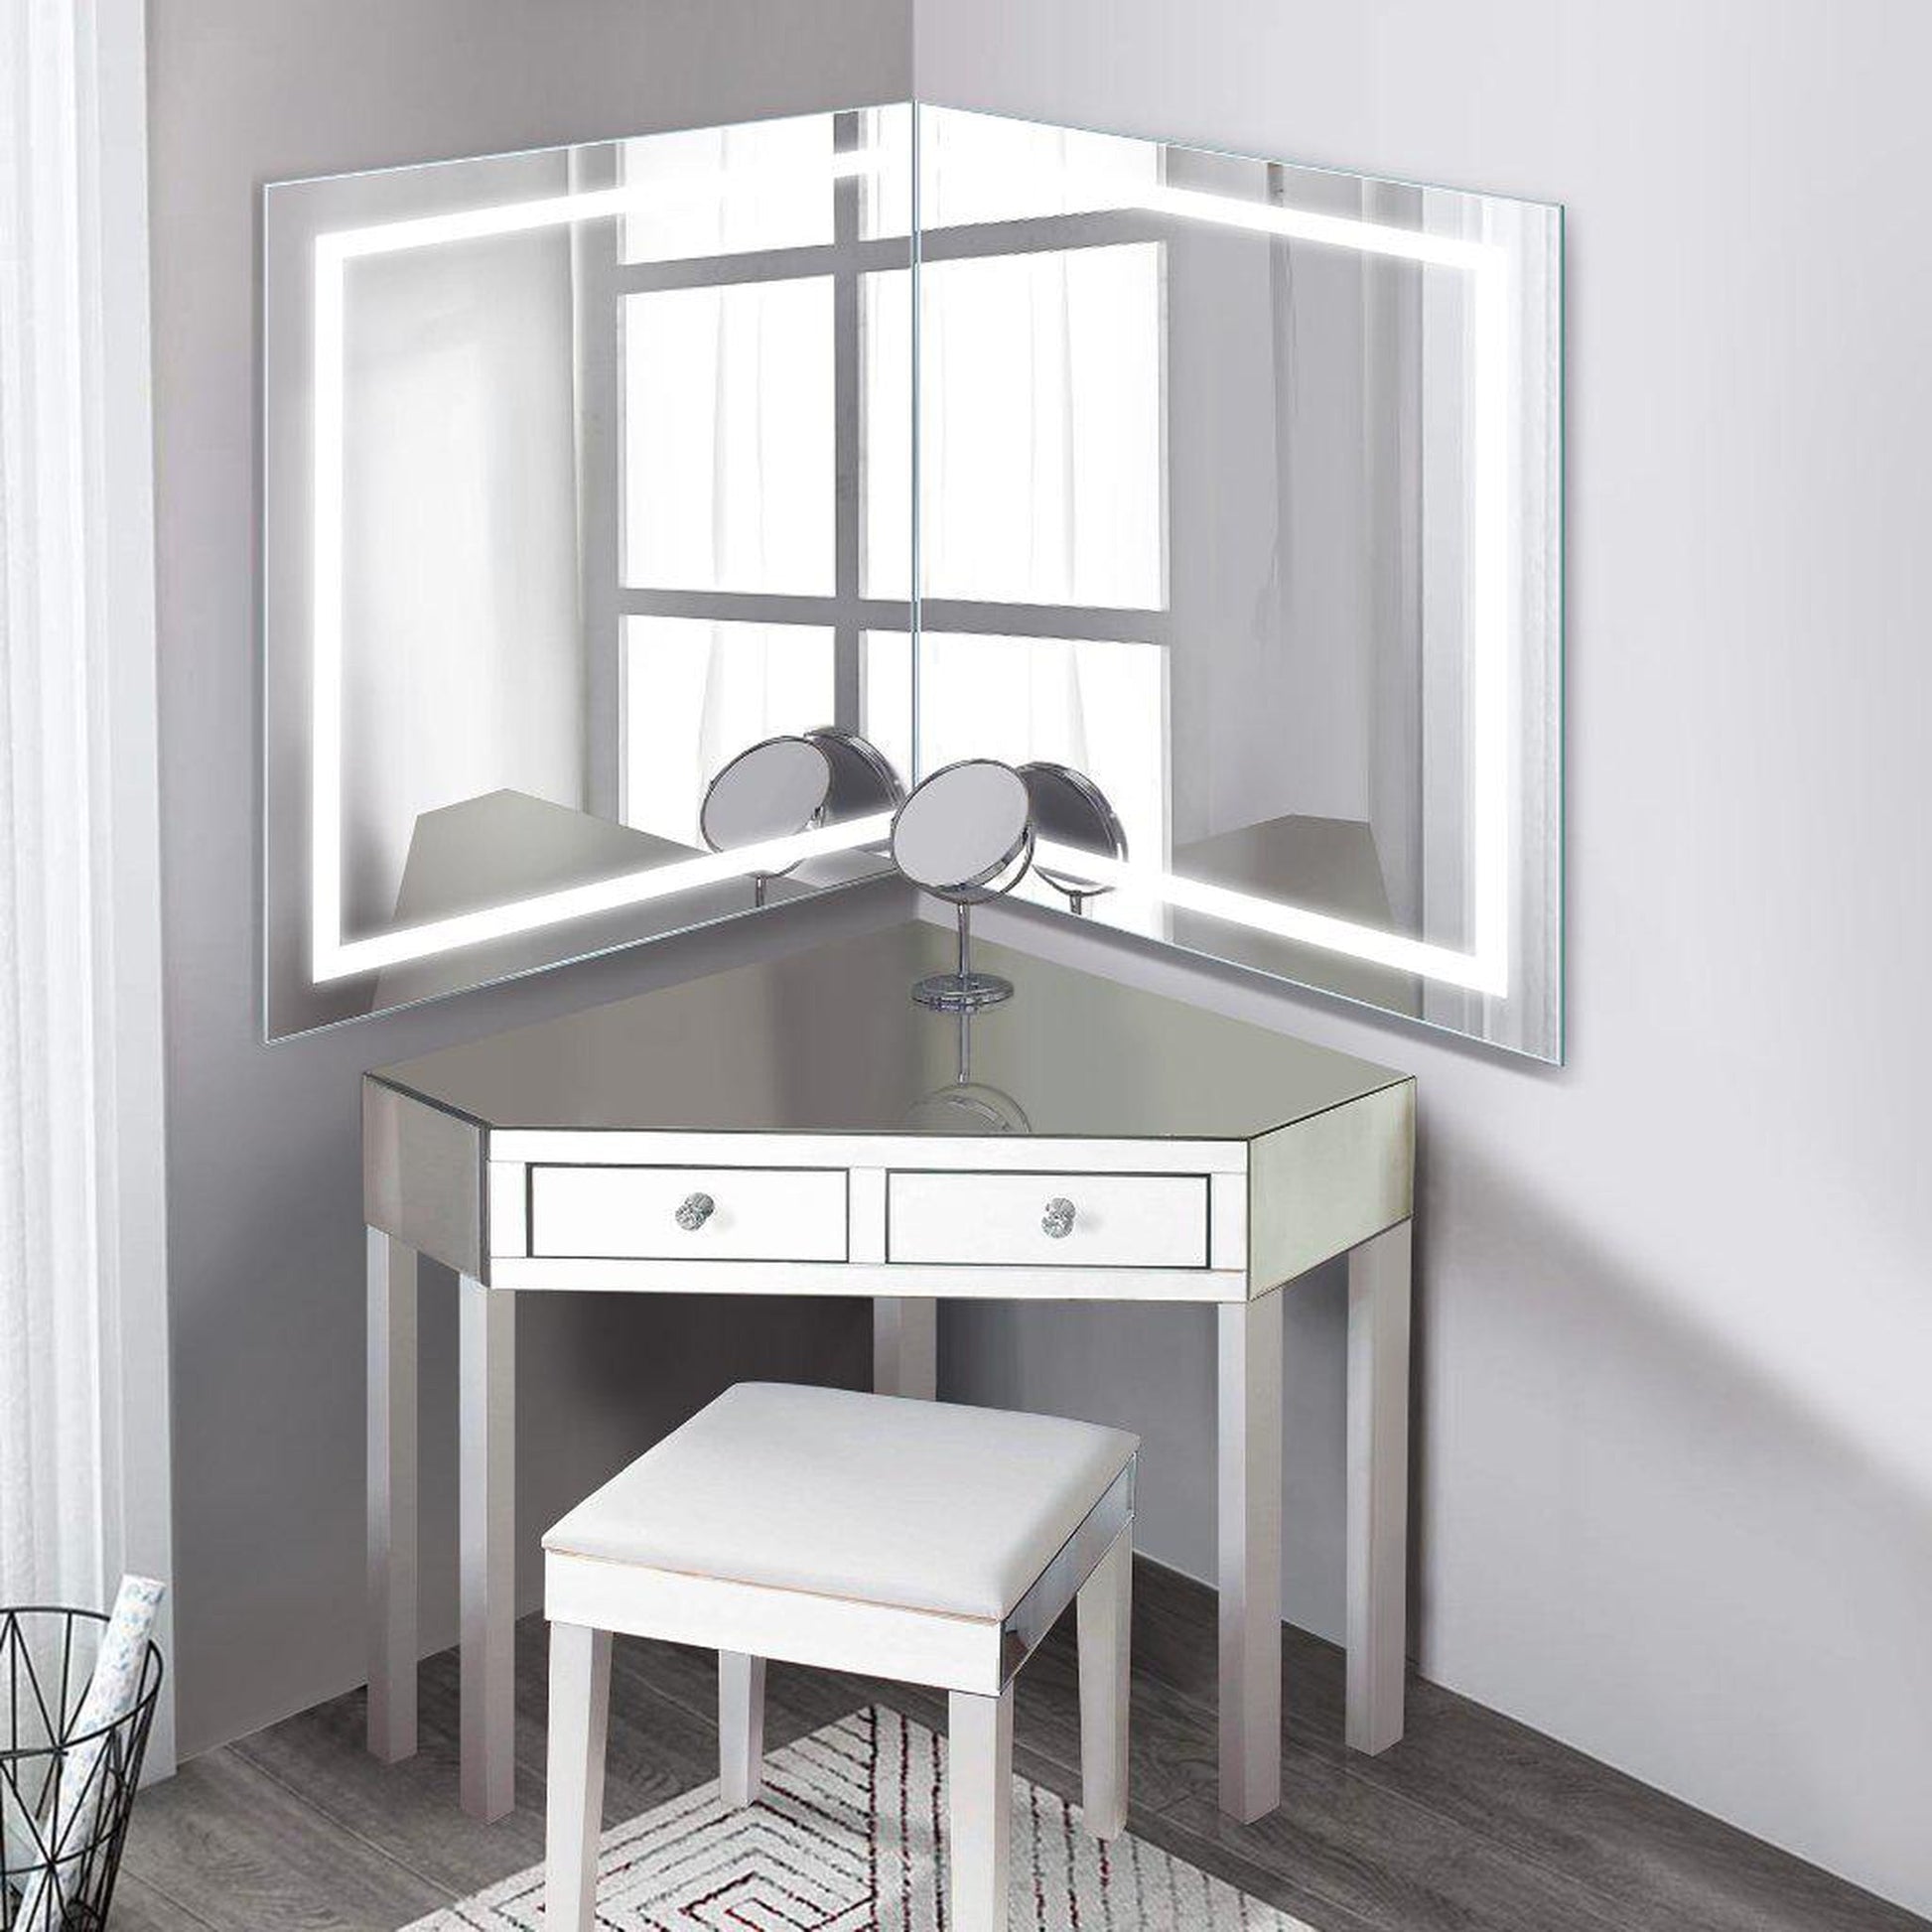 Krugg Reflections Mod 72" x 36" 36D 5000K Rectangular Modular Corner Wall-Mounted Silver-Backed LED Bathroom Vanity Mirror With Built-in Defogger and Dimmer